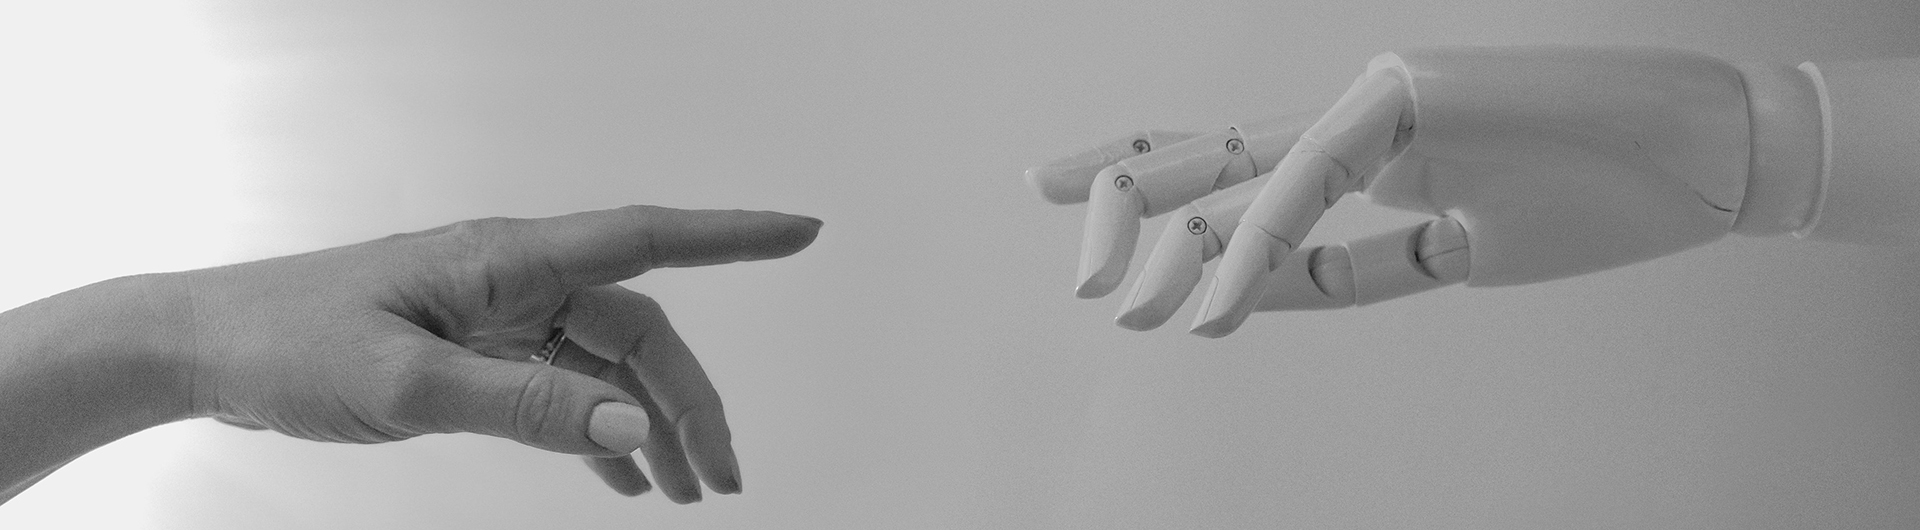 human hand and robot hand pointing to each other as in Michelangelo's hand of god on the Sistine chapel (black and white)